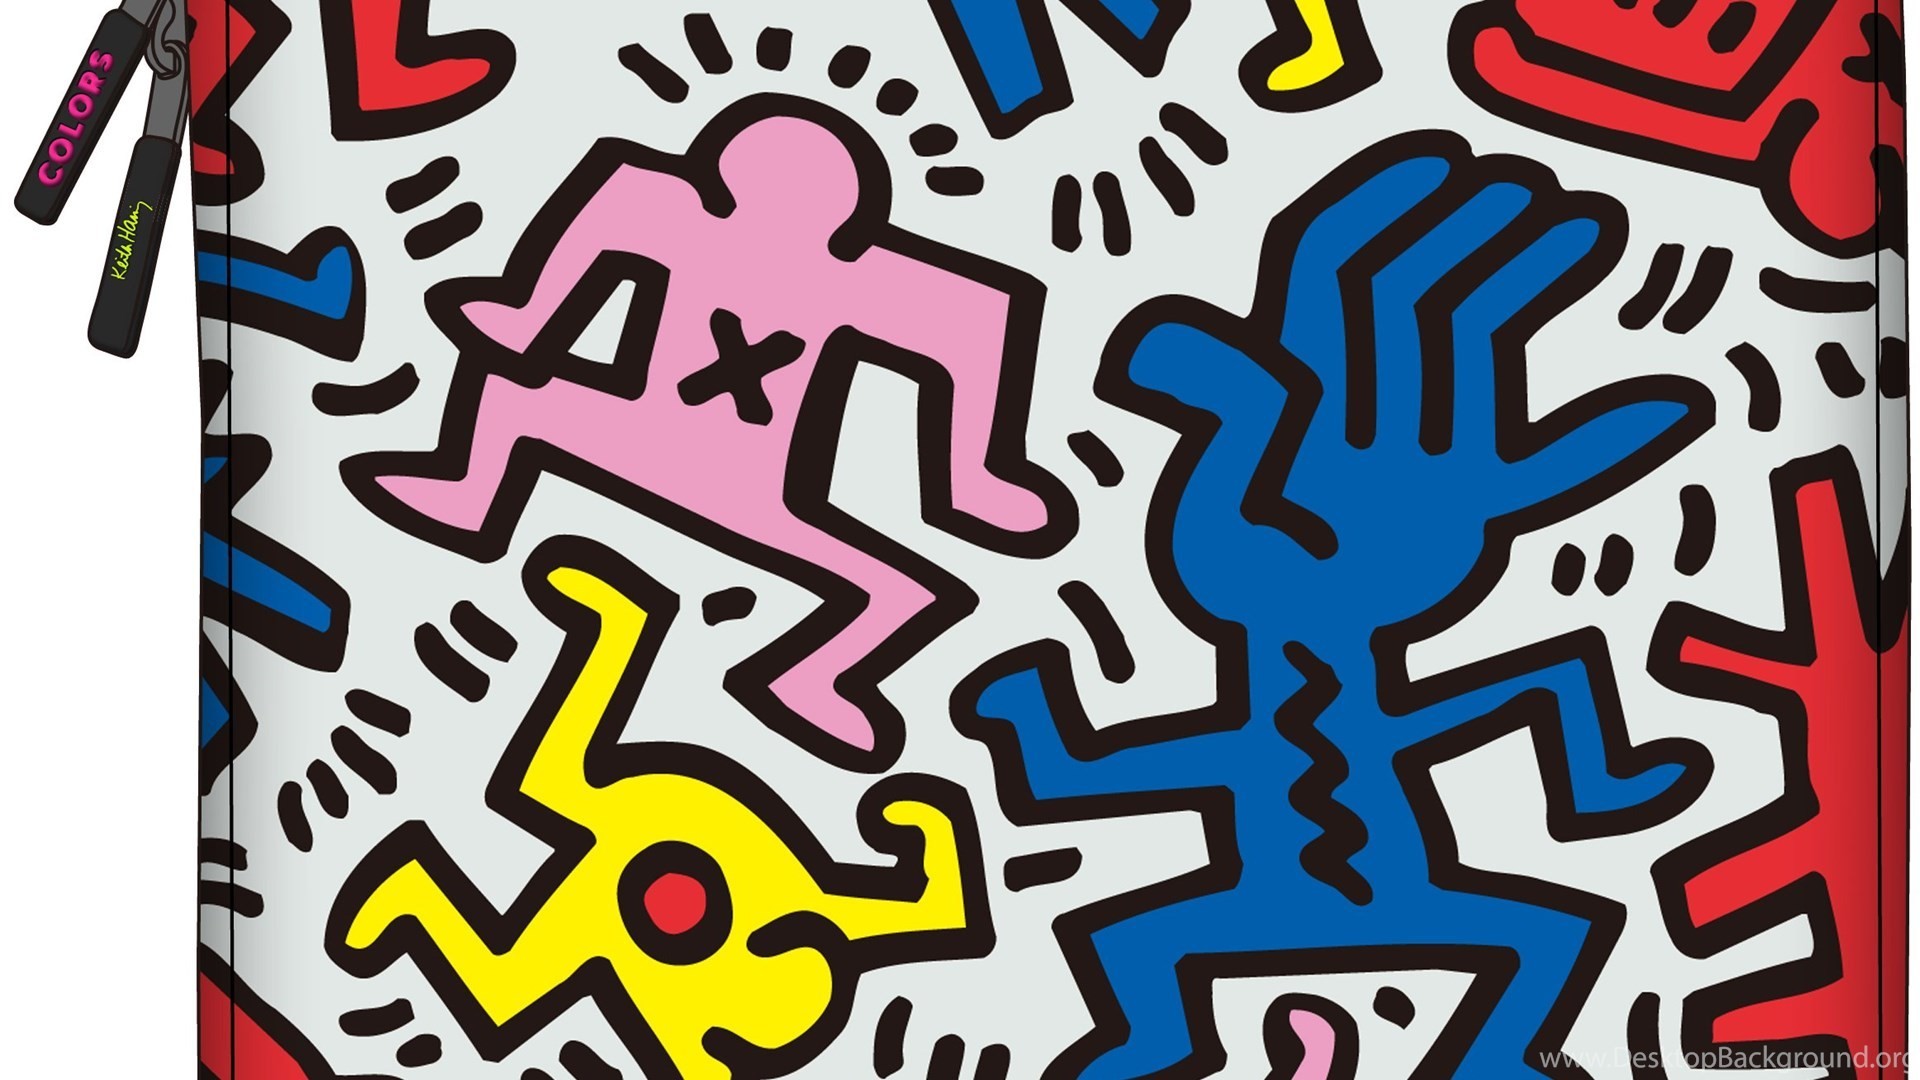 Keith Haring Wallpapers 52 Images